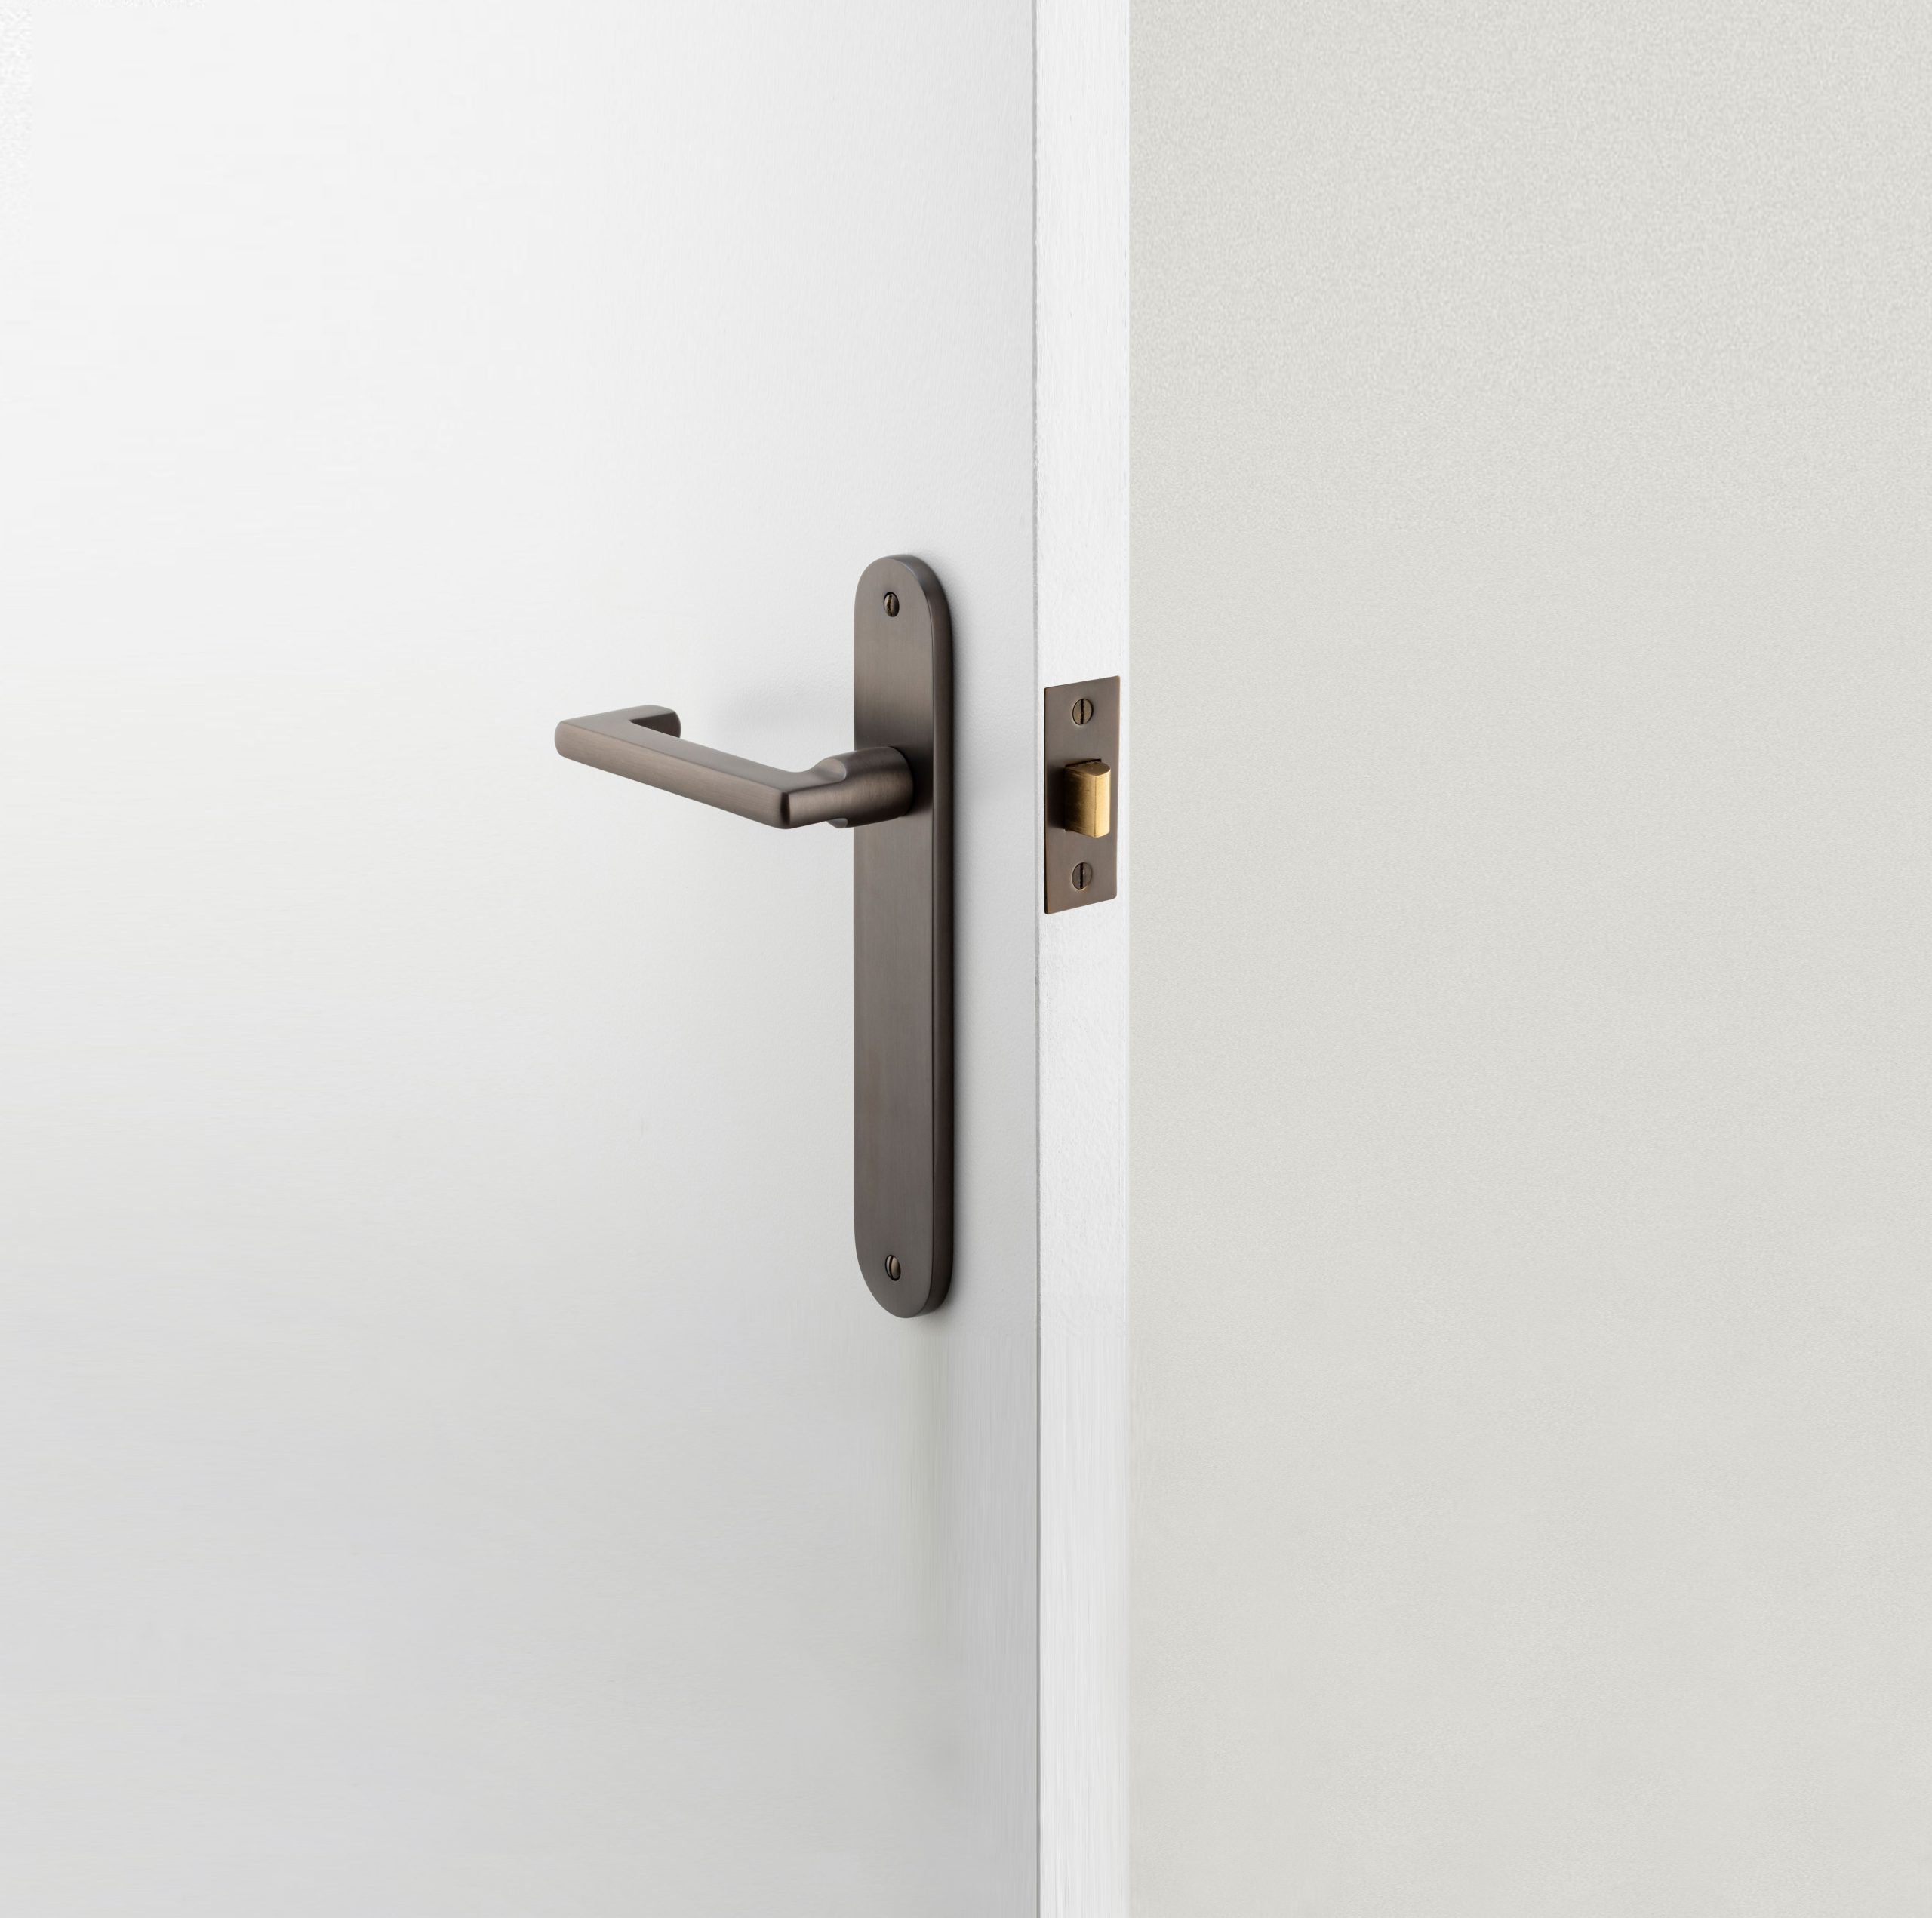 12352 - Baltimore Return Lever - Oval Backplate - Brushed Chrome - Passage